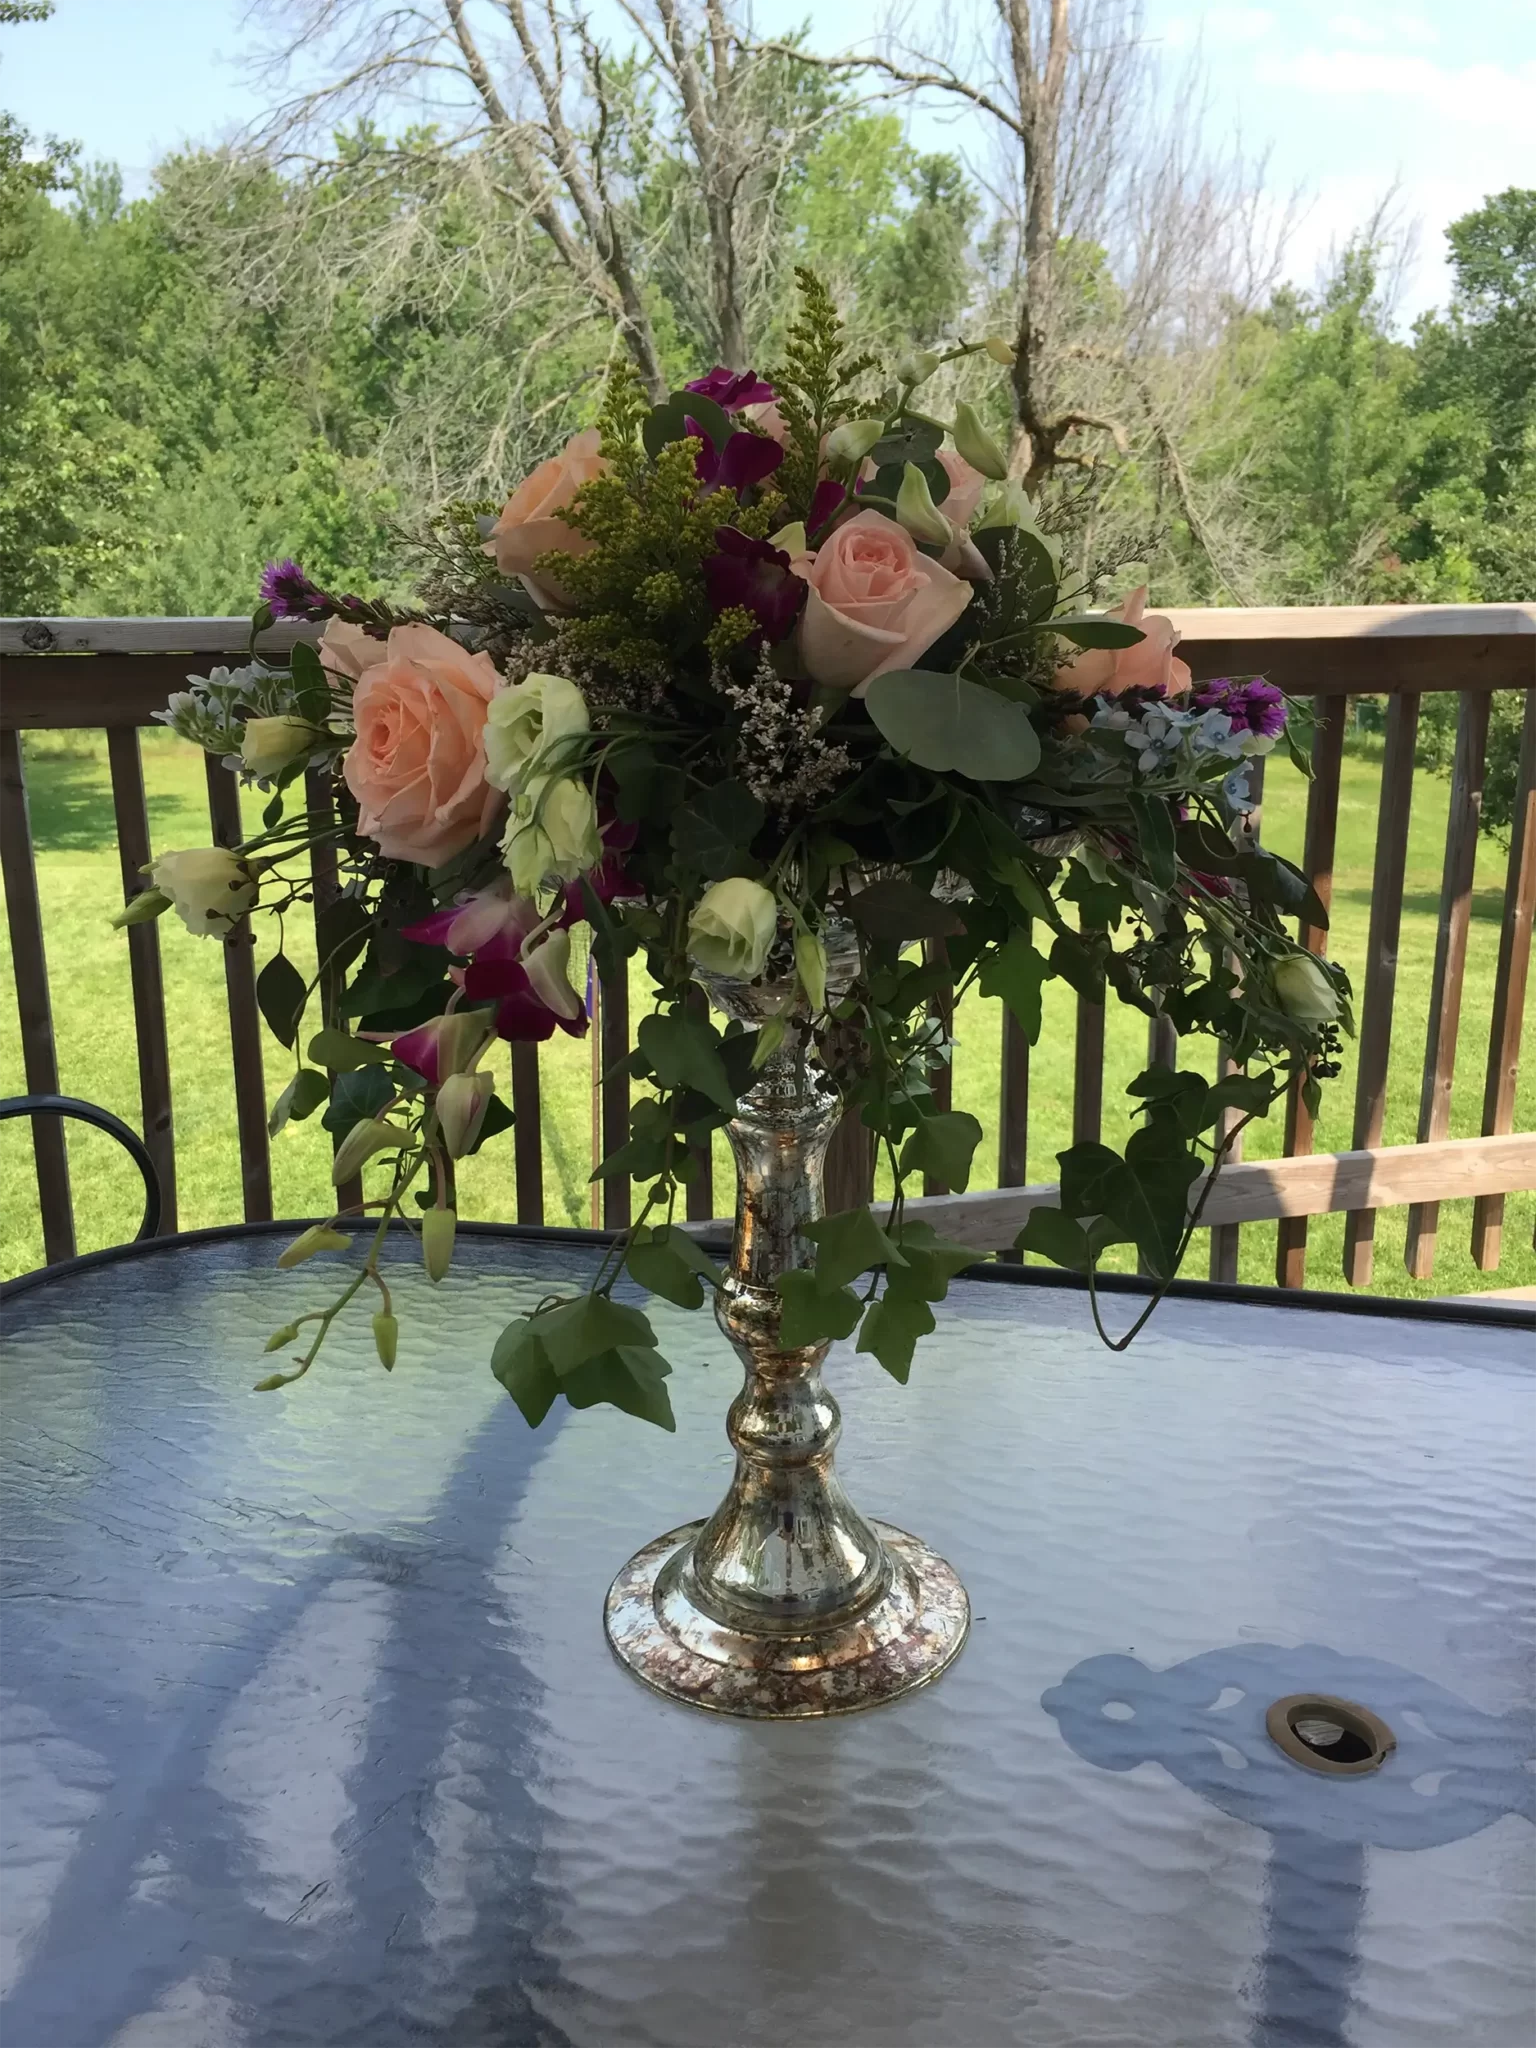 Hand delivered bouquet made with fresh flowers